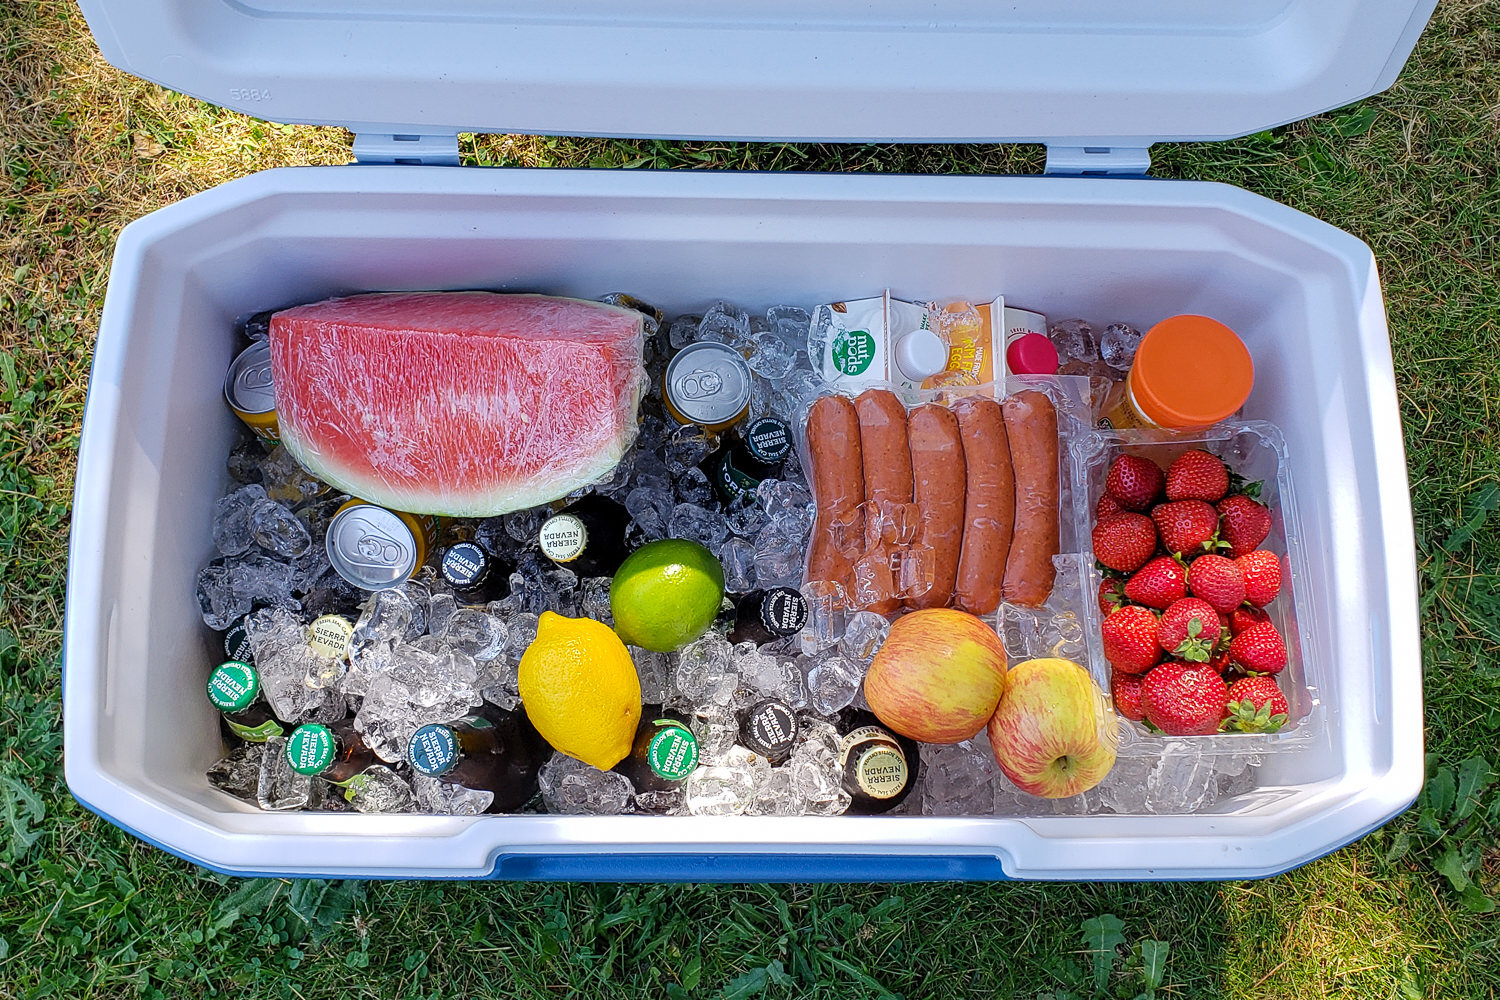 You’ll need a cooler and plenty of ice to keep fresh meat, eggs, vegetables & dairy products chilled